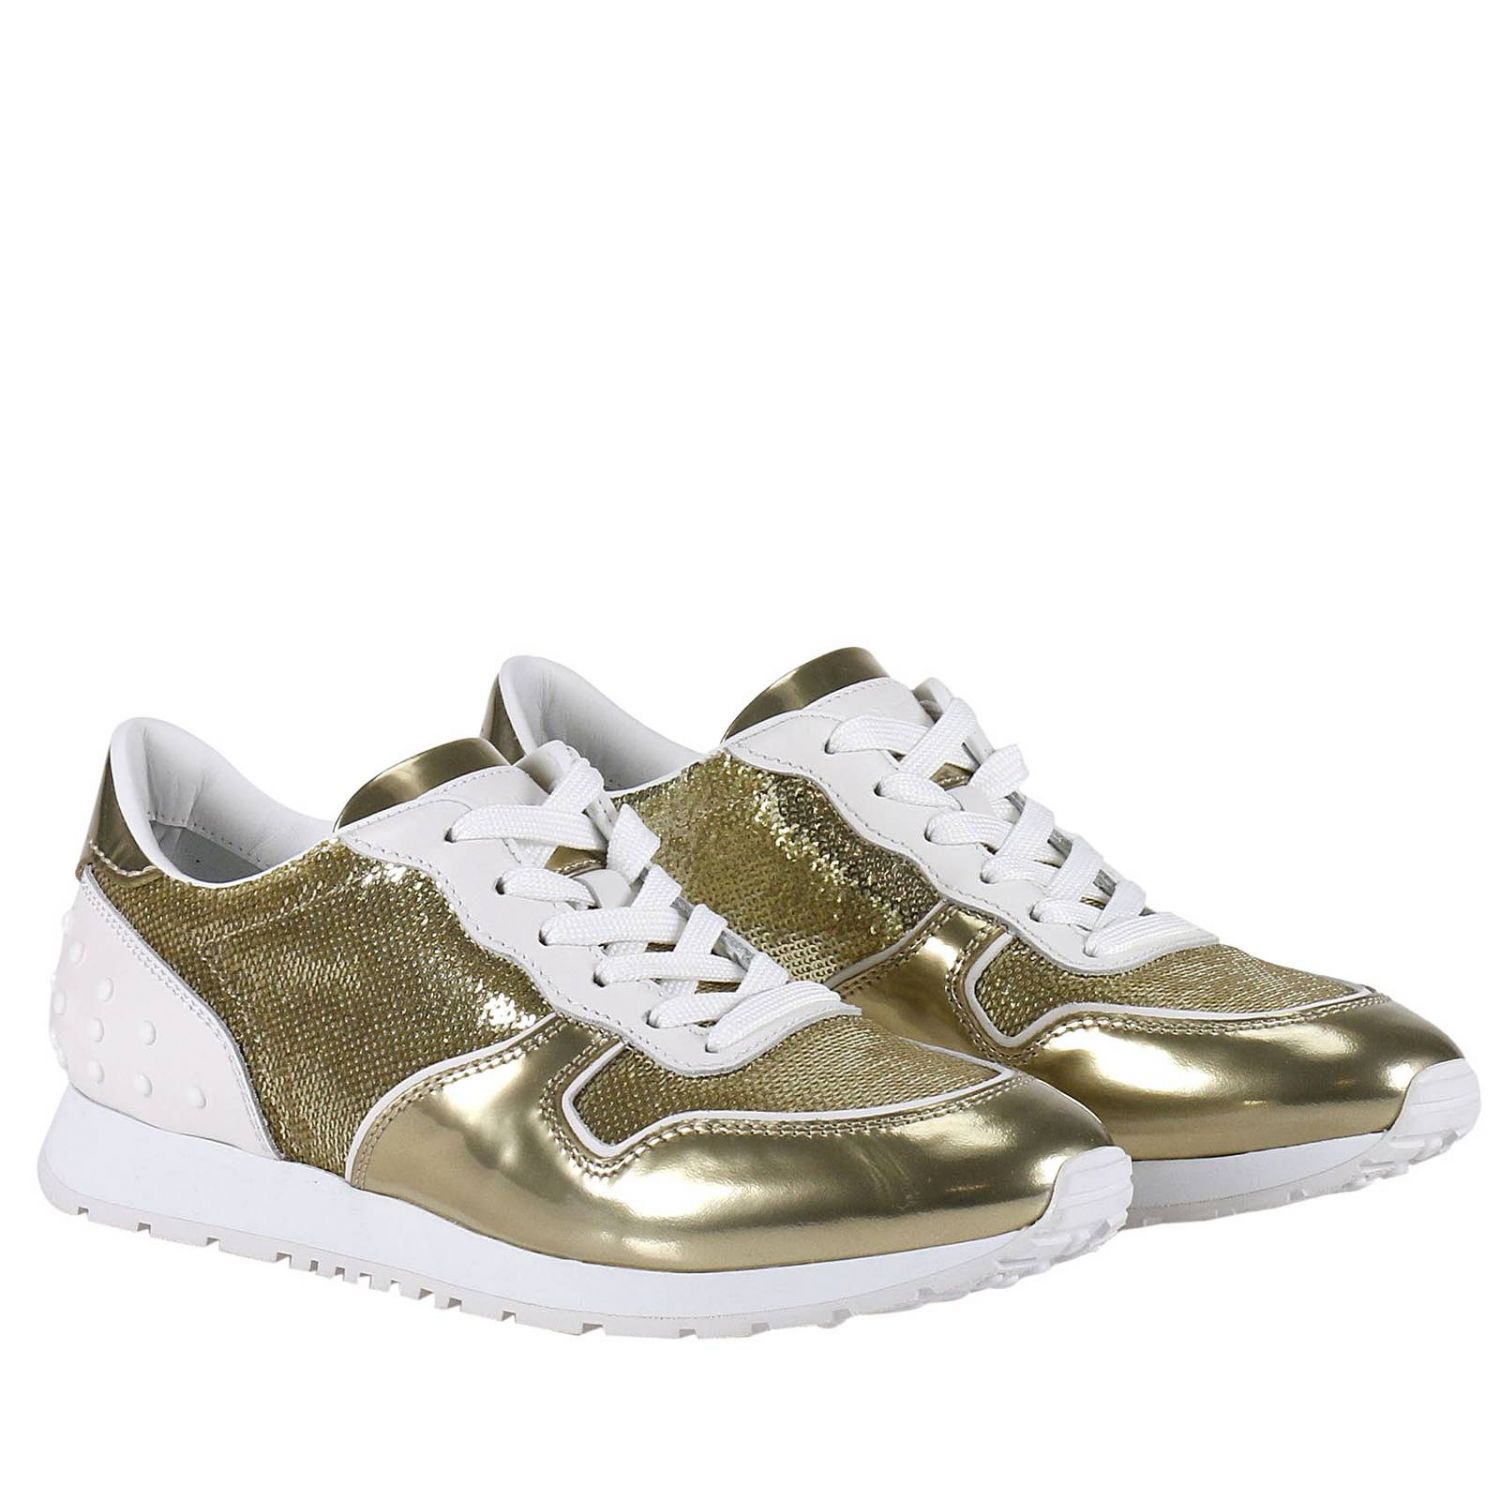 Tods Outlet: Shoes women Tod's | Sneakers Tods Women Gold | Sneakers ...